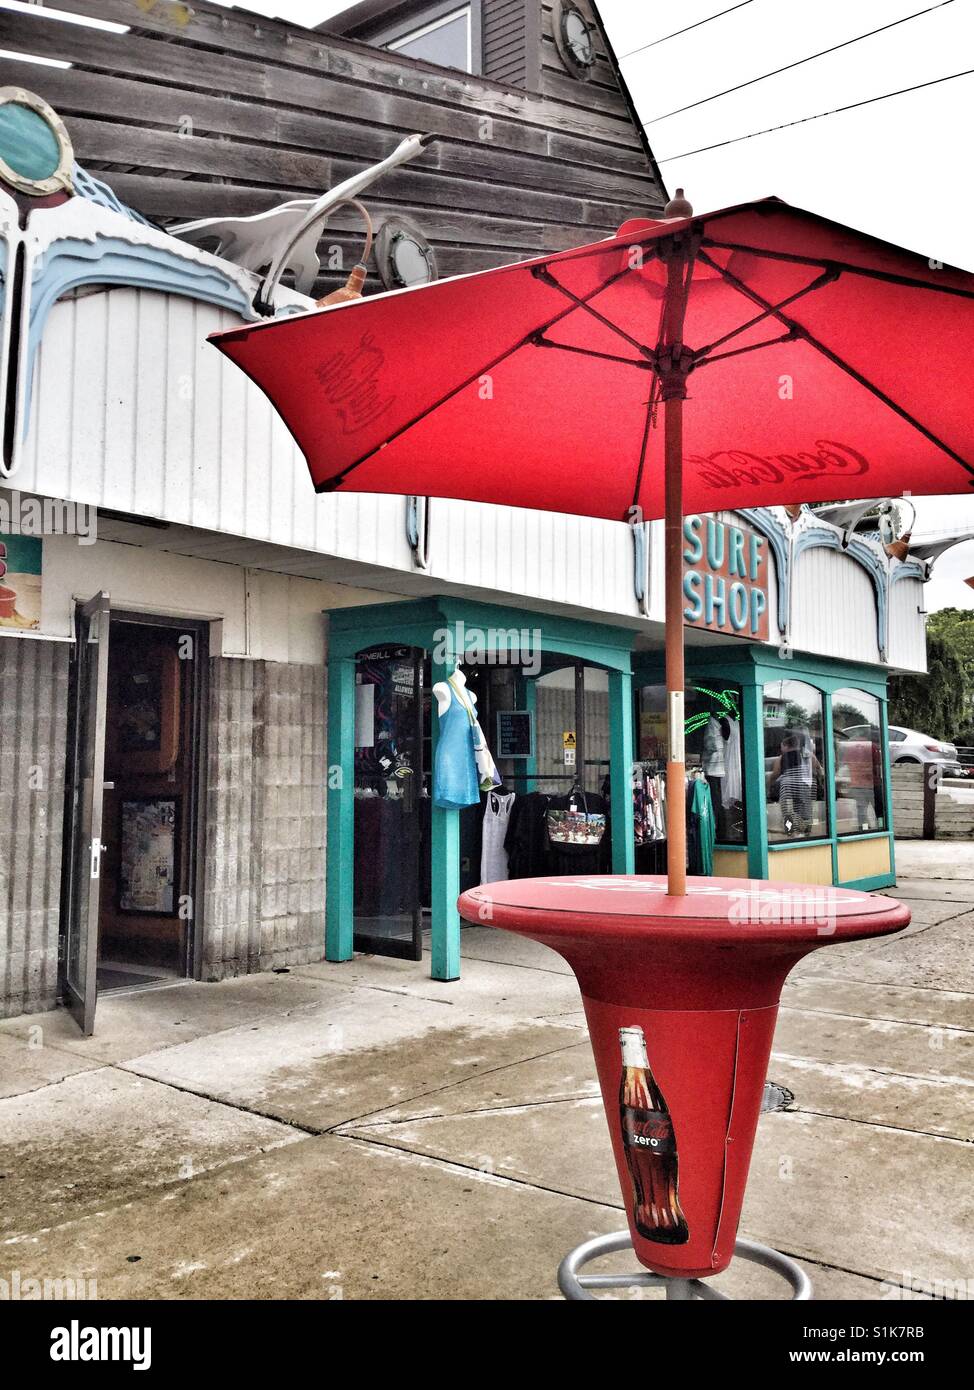 Red table and umbrella in front of a surf shop in Port Dover, Ontario. Stock Photo